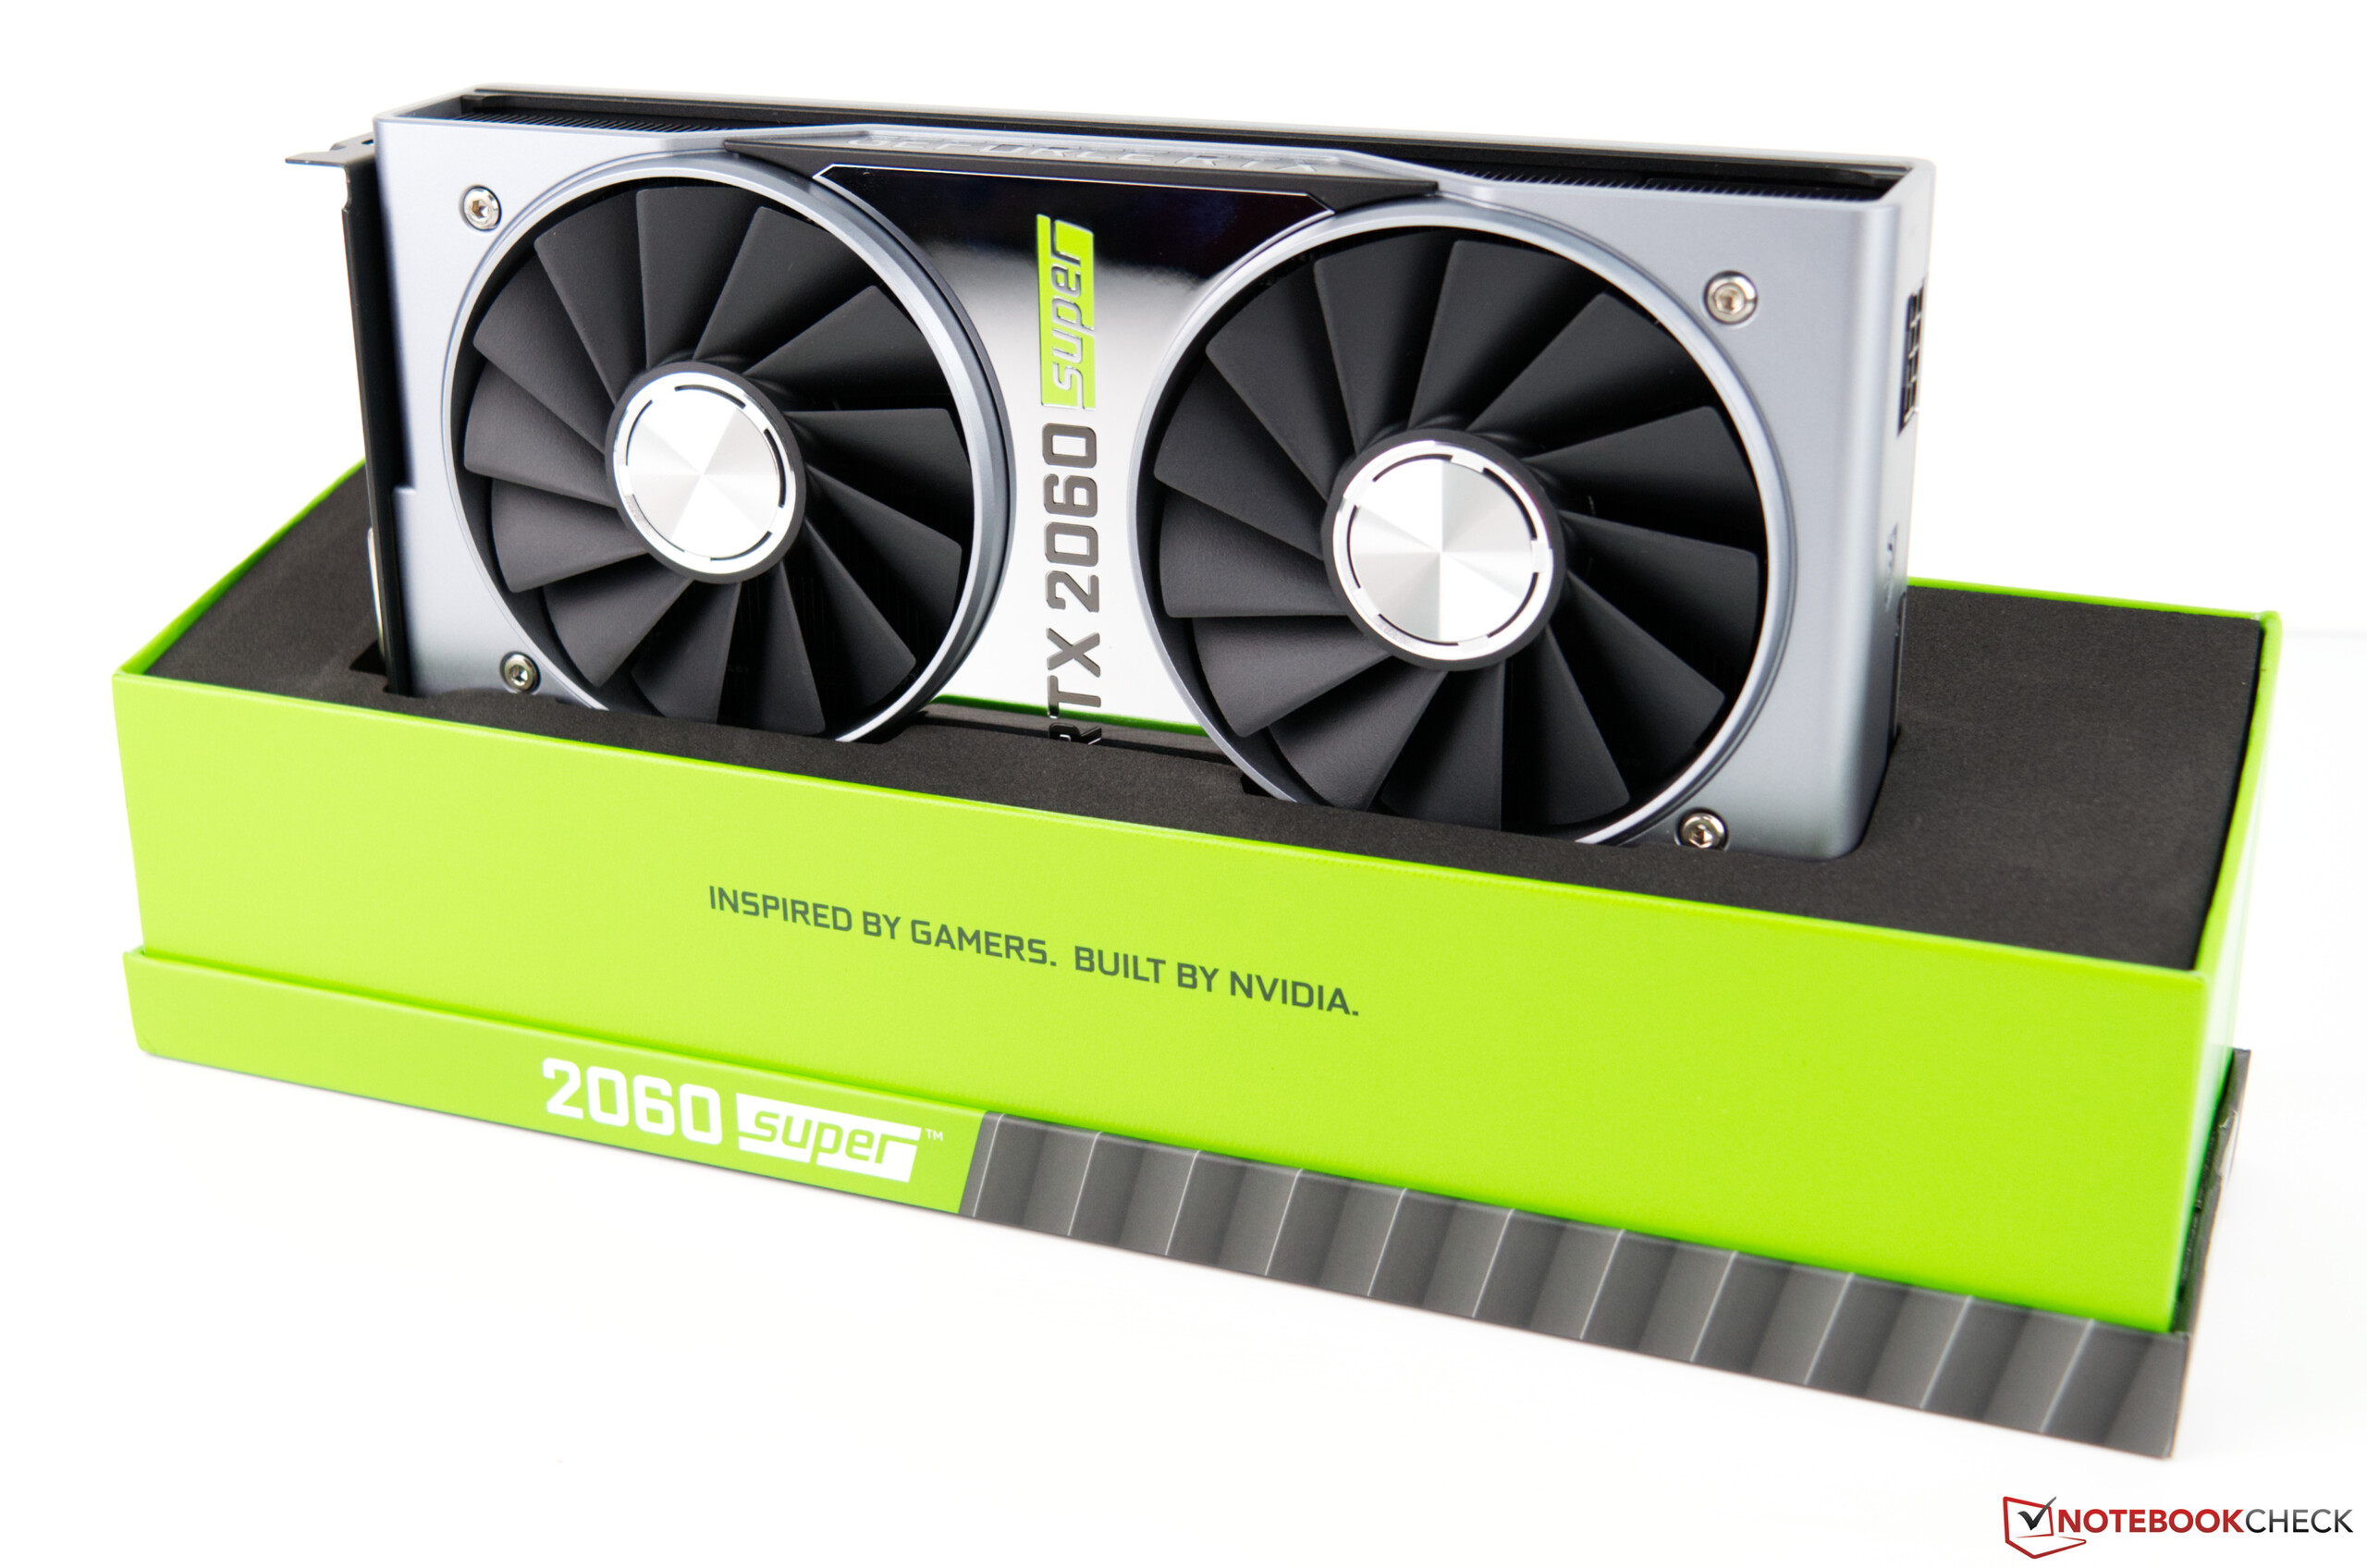 Nvidia GeForce RTX 2060 Super Review: The entry-level GPU comes with 8 of VRAM - NotebookCheck.net Reviews